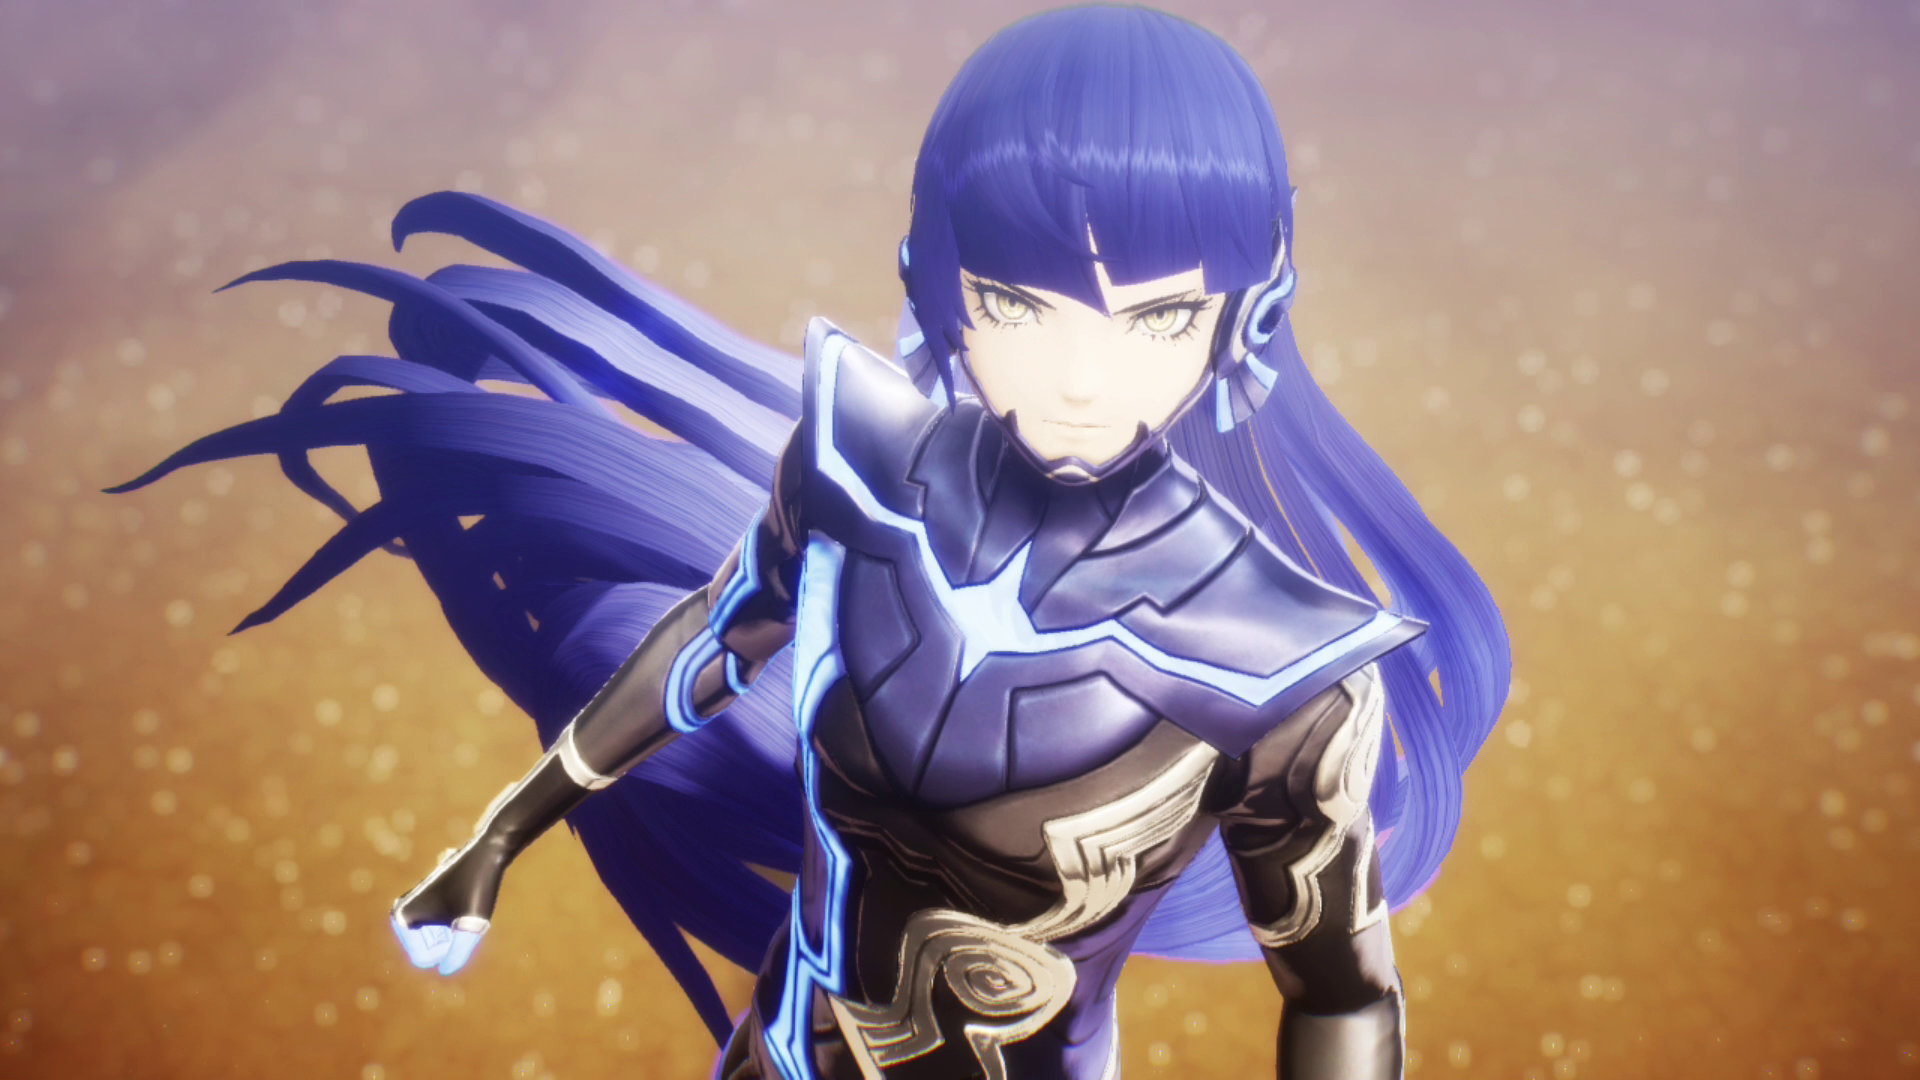 Shin Megami Tensei V screenshot of a character looking intently at the viewer with long, flowing indigo hair, a futuristic metallic bodysuit.